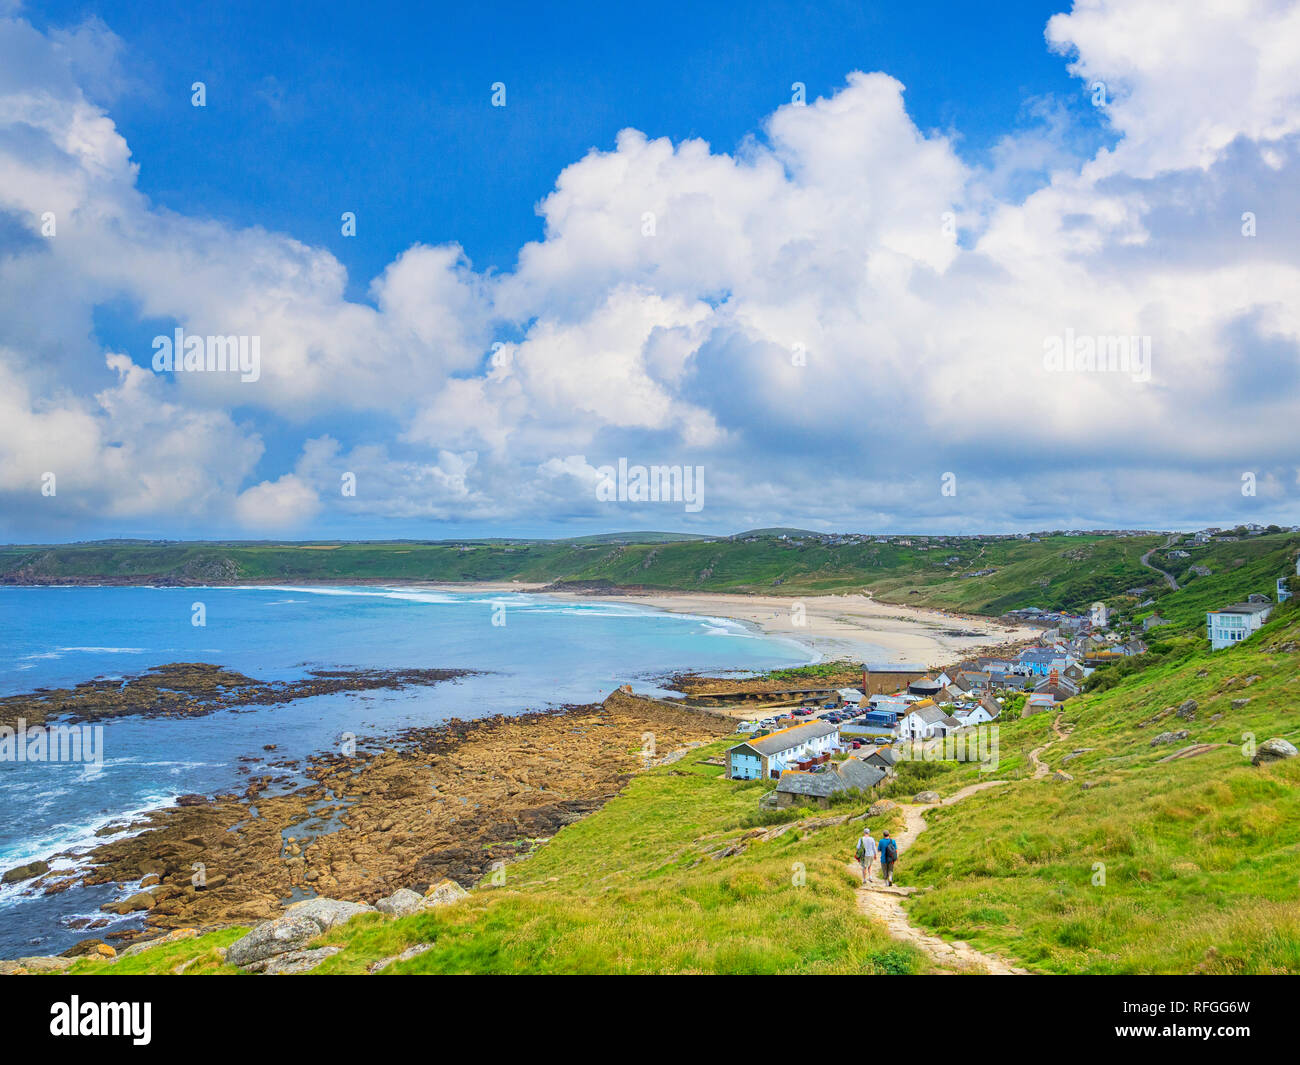 15 June 2018: Sennen Cove, Cornwall, UK - The South West Coast Path winds its way into Sennen Cove village. Stock Photo